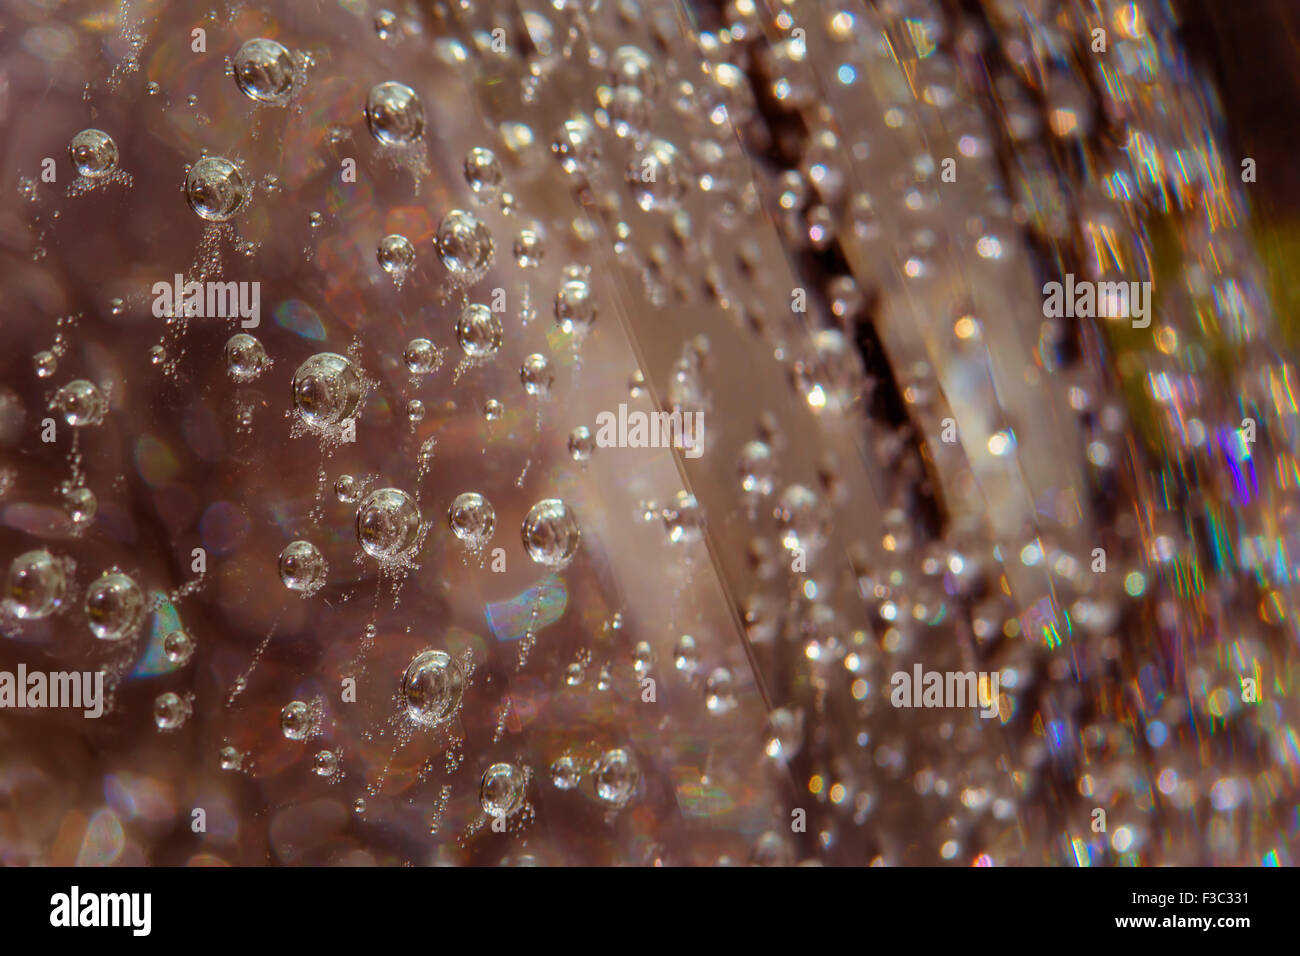 Macro photograph of bubbles in glass. Stock Photo